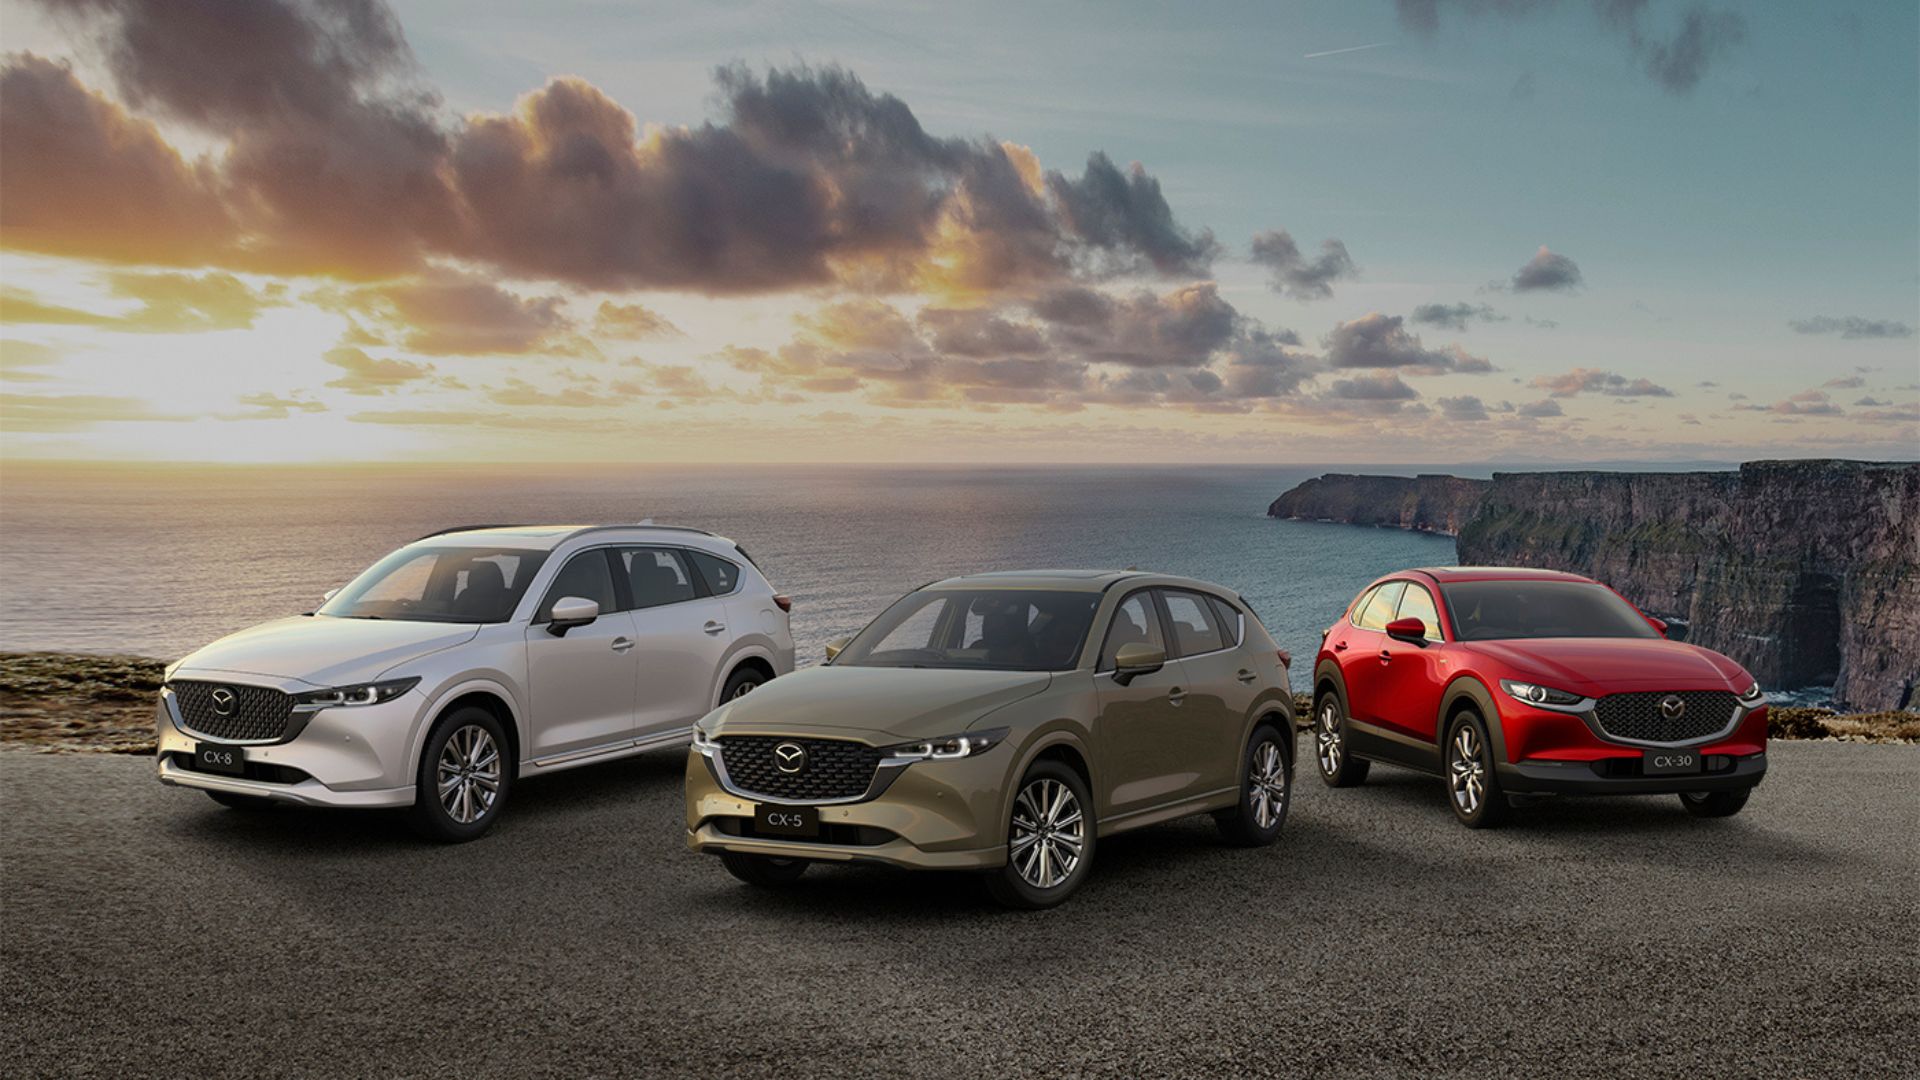 <p>Now’s the perfect time to drive away in your brand new Mazda with stock available across the range.</p>